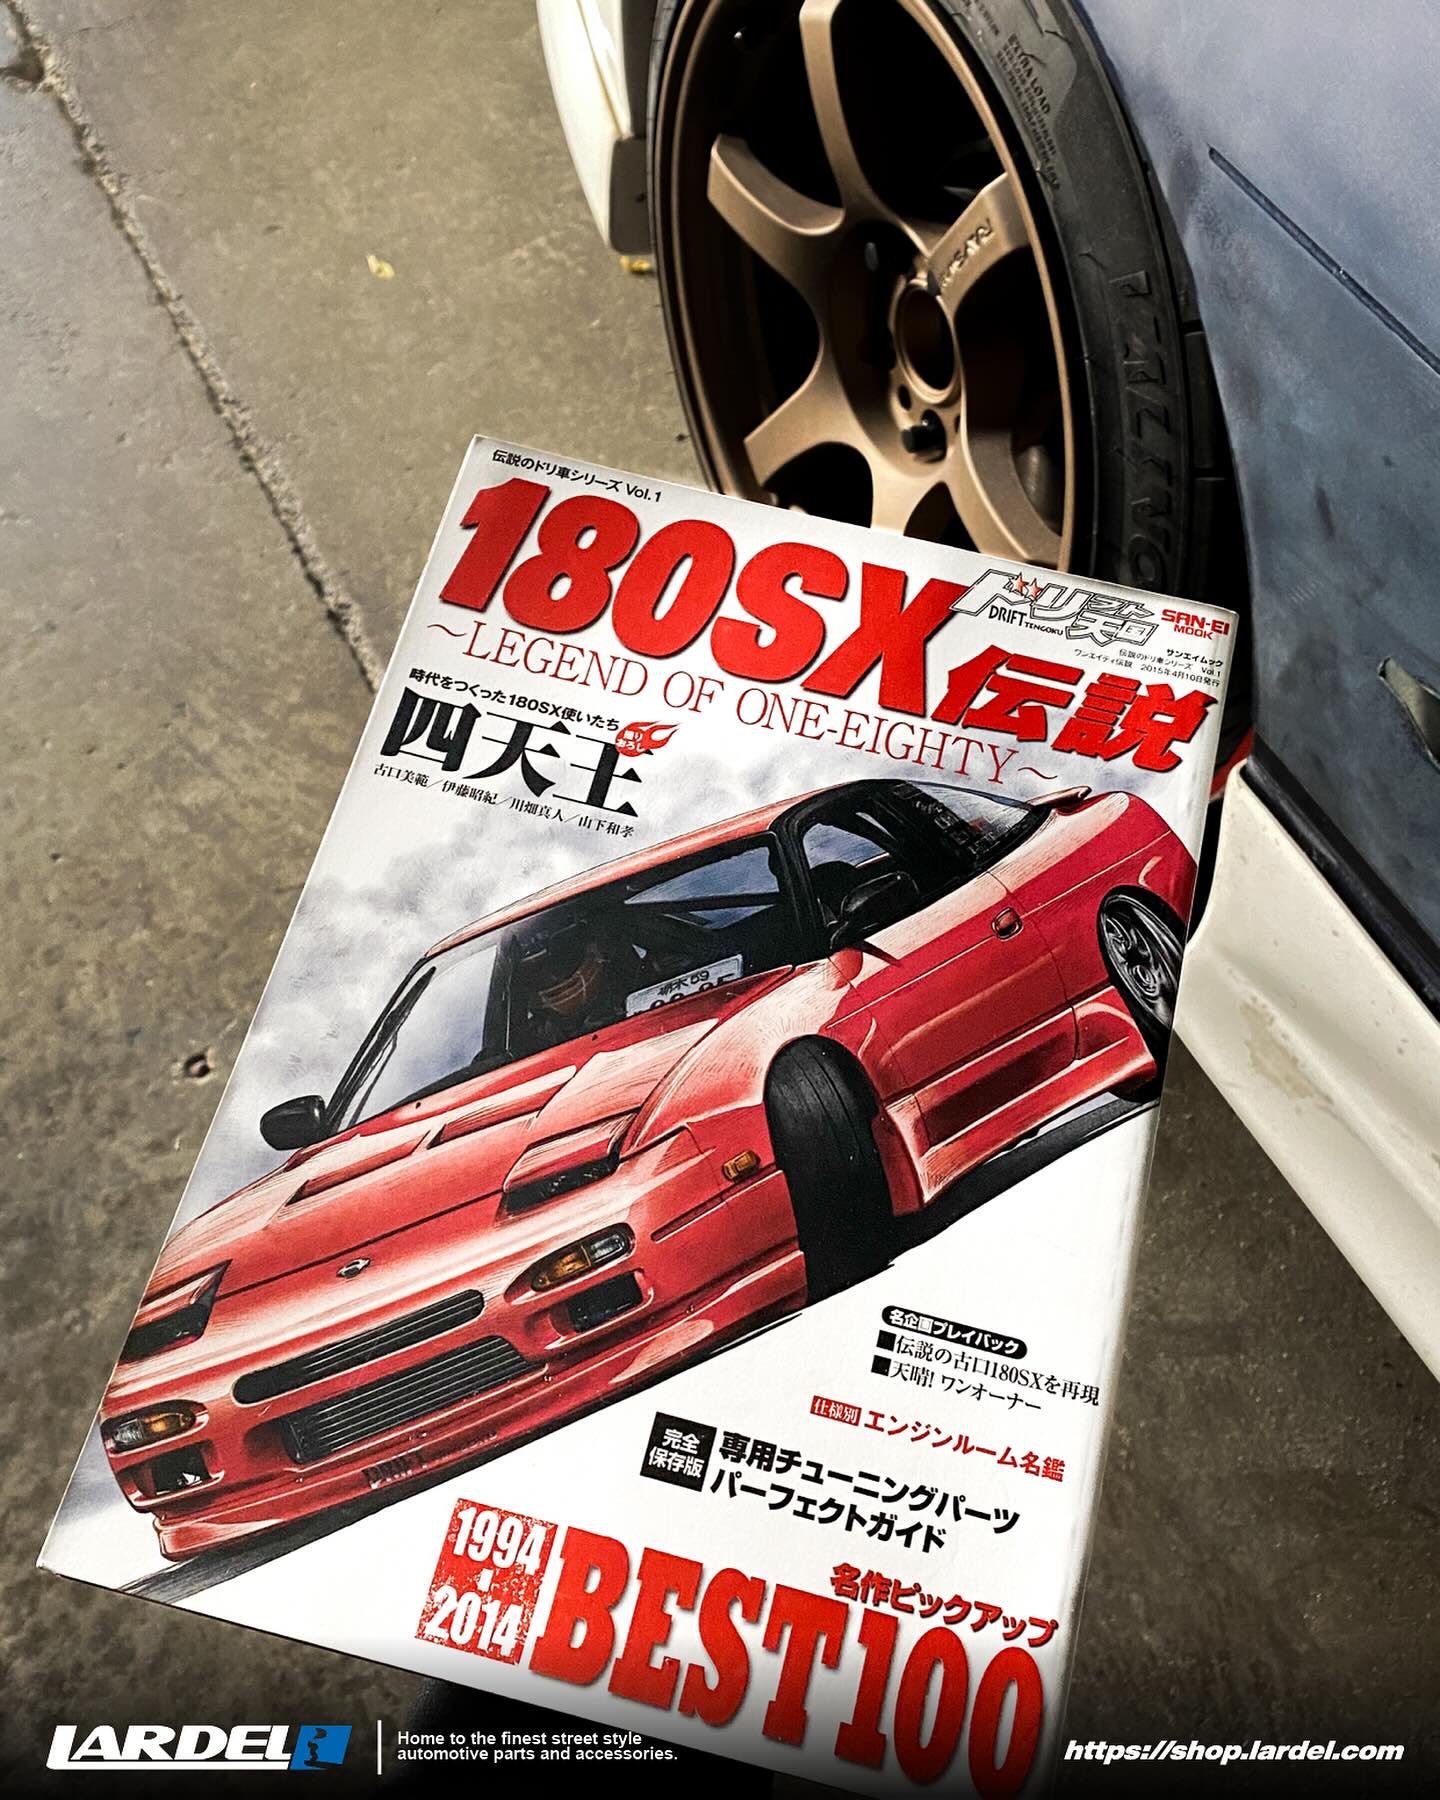 THE 180sx magazine in great condition. A must have for the true S13 enthusiast. Available at https://shop.lardel.com

#shoplardelcom